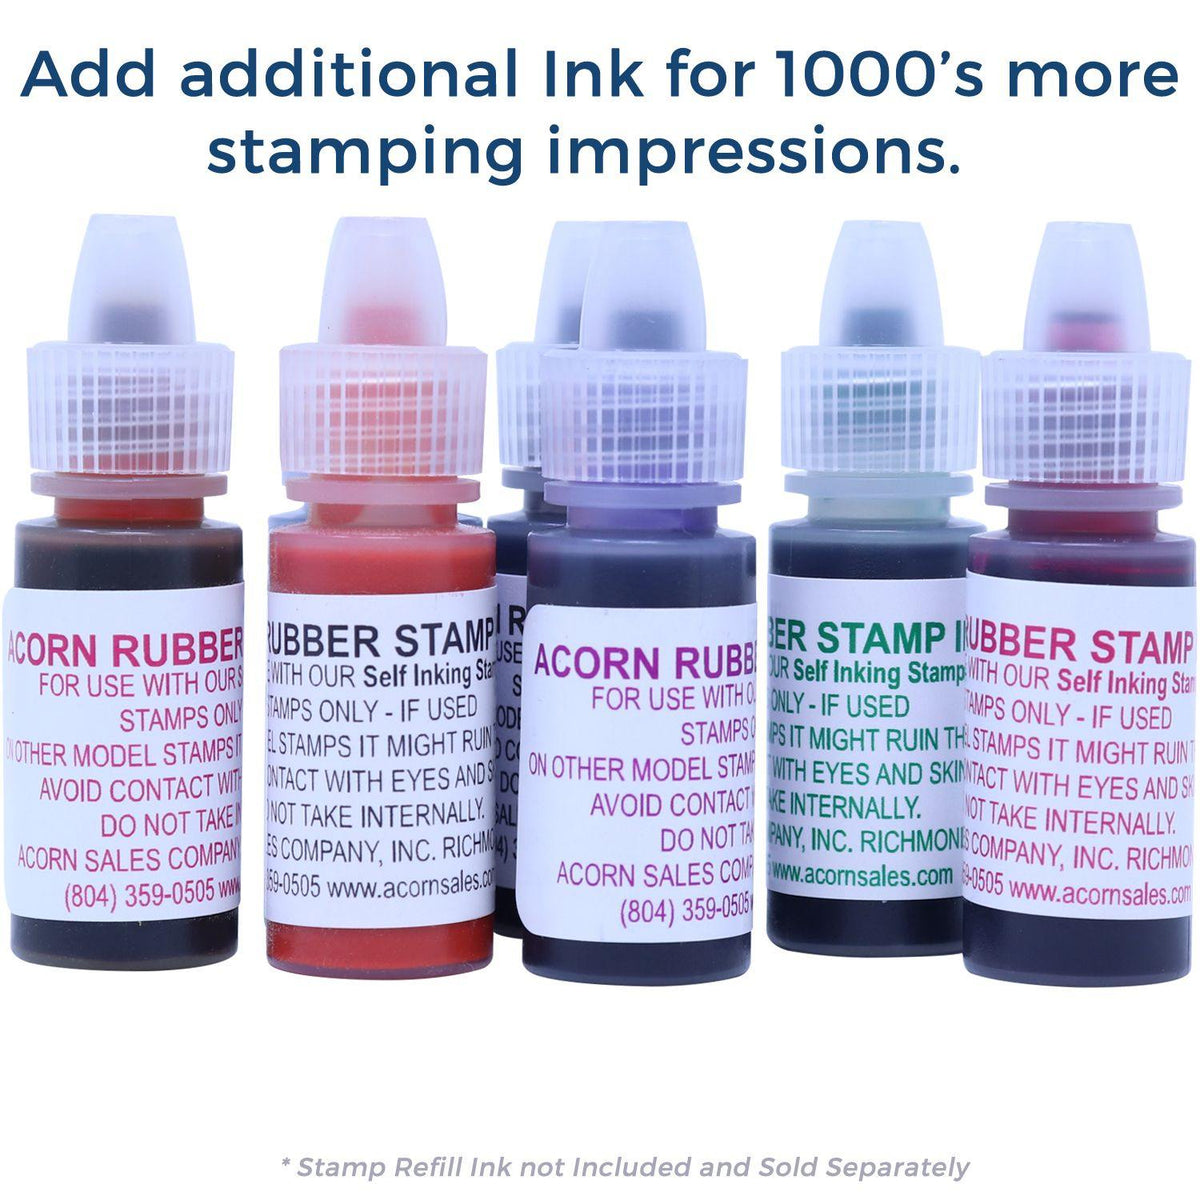 Refill Inks for Large Pre-Inked Banco Stamp Available